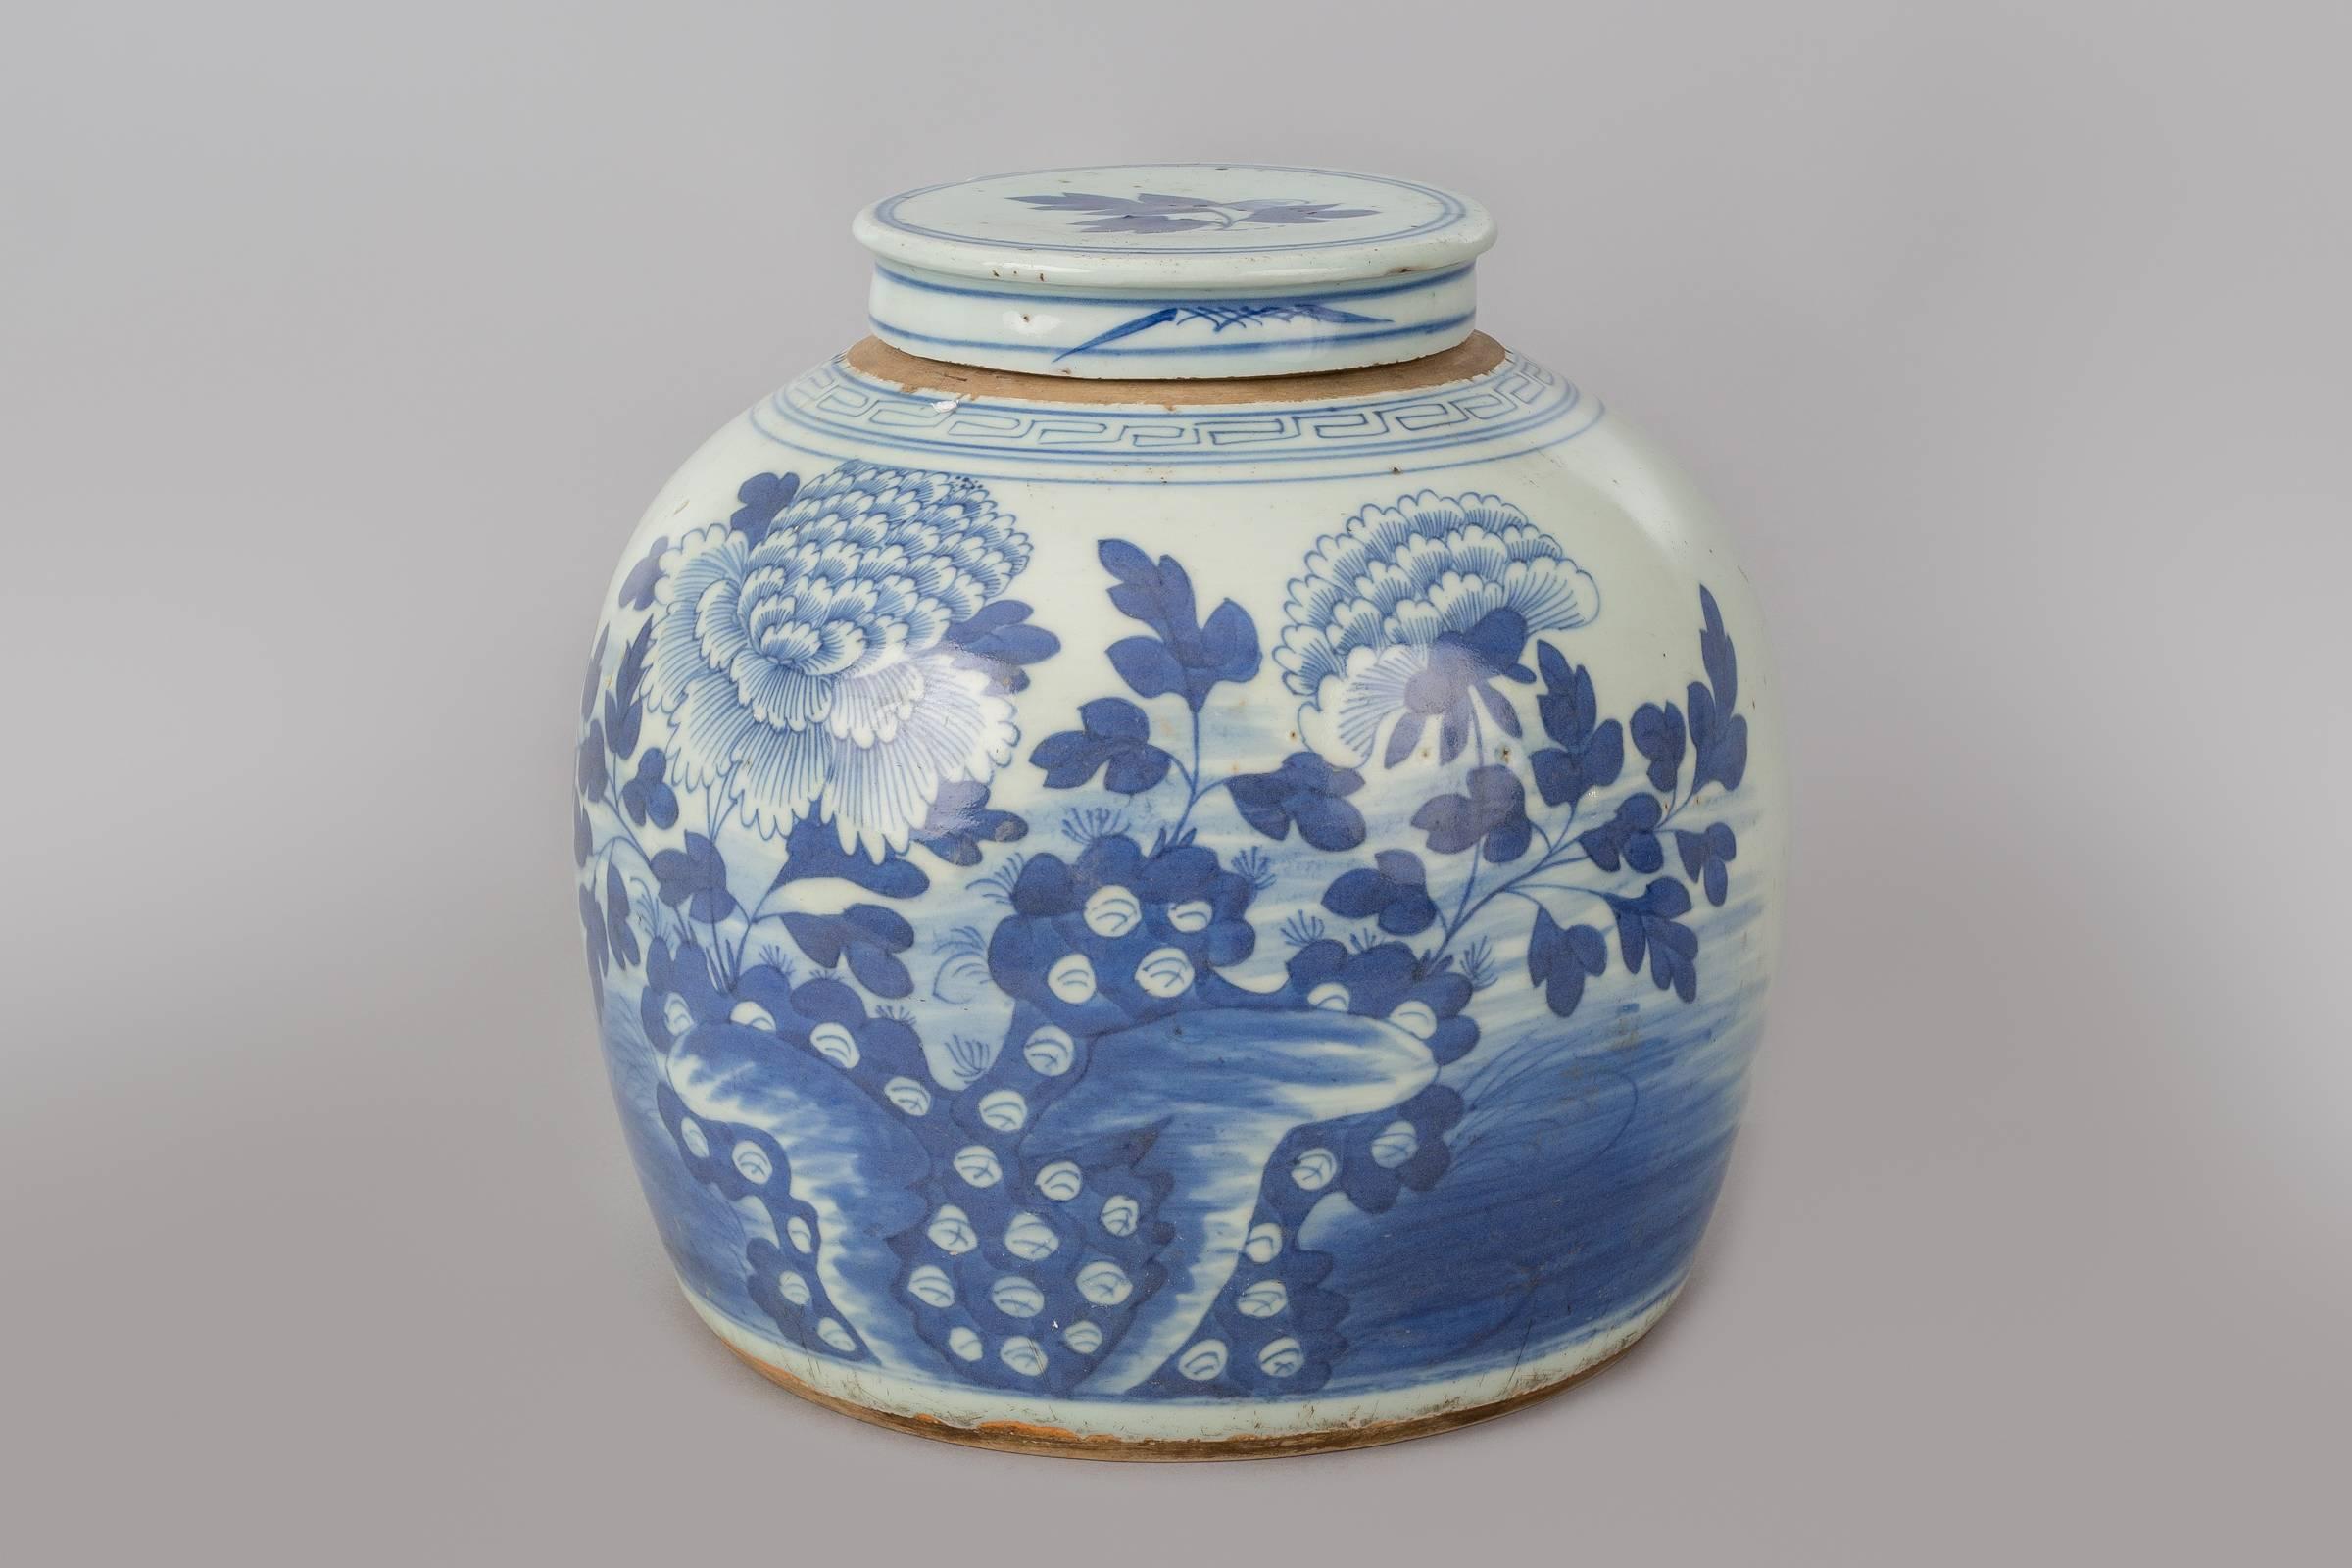 Large Chinese Canton export blue and white porcelain squat vase with lid, decorated with two chrysanthemums and foliage, the shoulder of the vase with geometric key design. The vase sits on a Chinese carved and pierced black wooden stand.